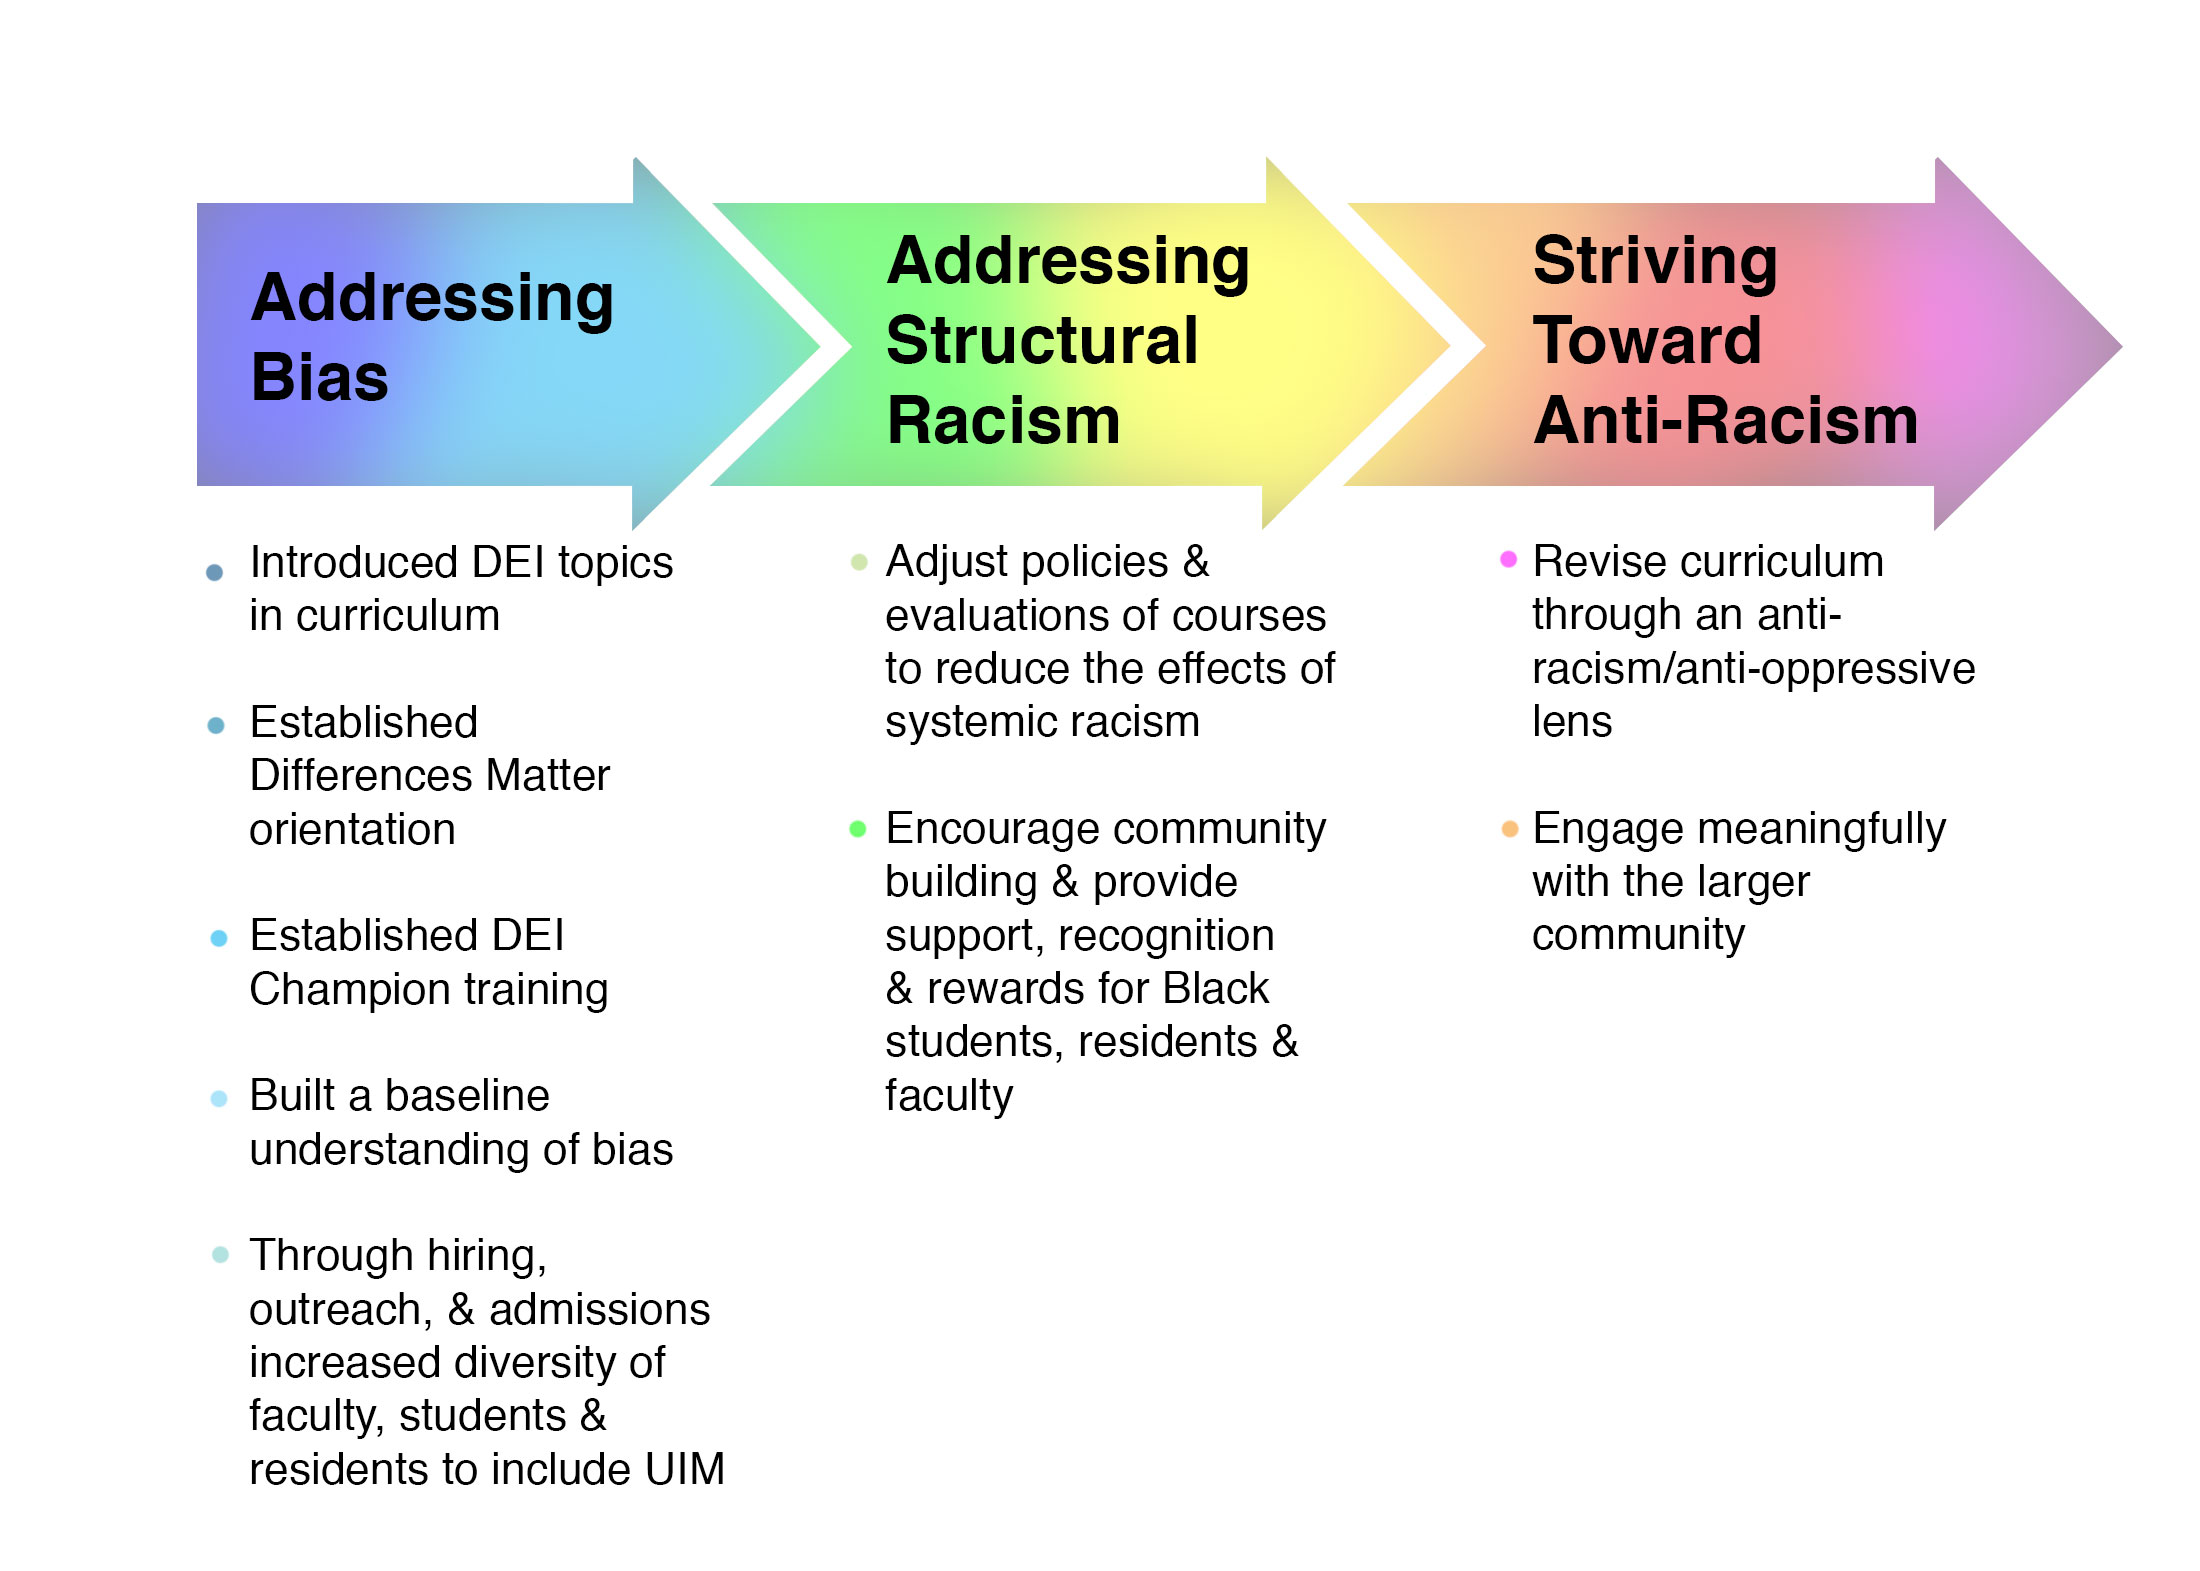 Flowchart with points on addressing bias, addressing structural racism, and striving toward anti-racism